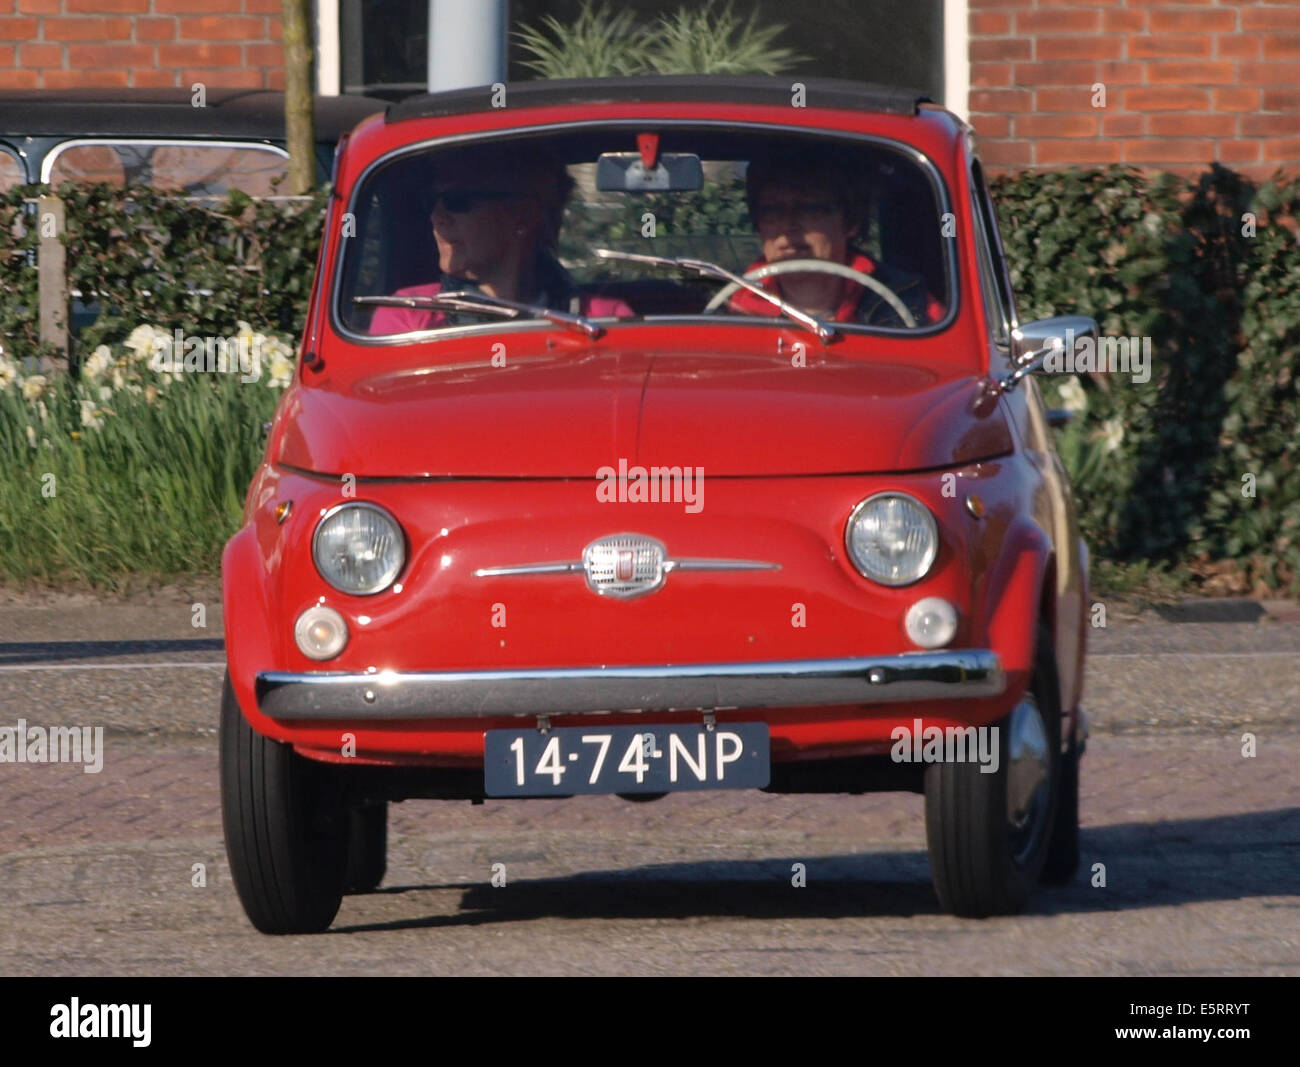 1970 Fiat , Dutch licence registration 14-74-NP, pic3 Stock Photo